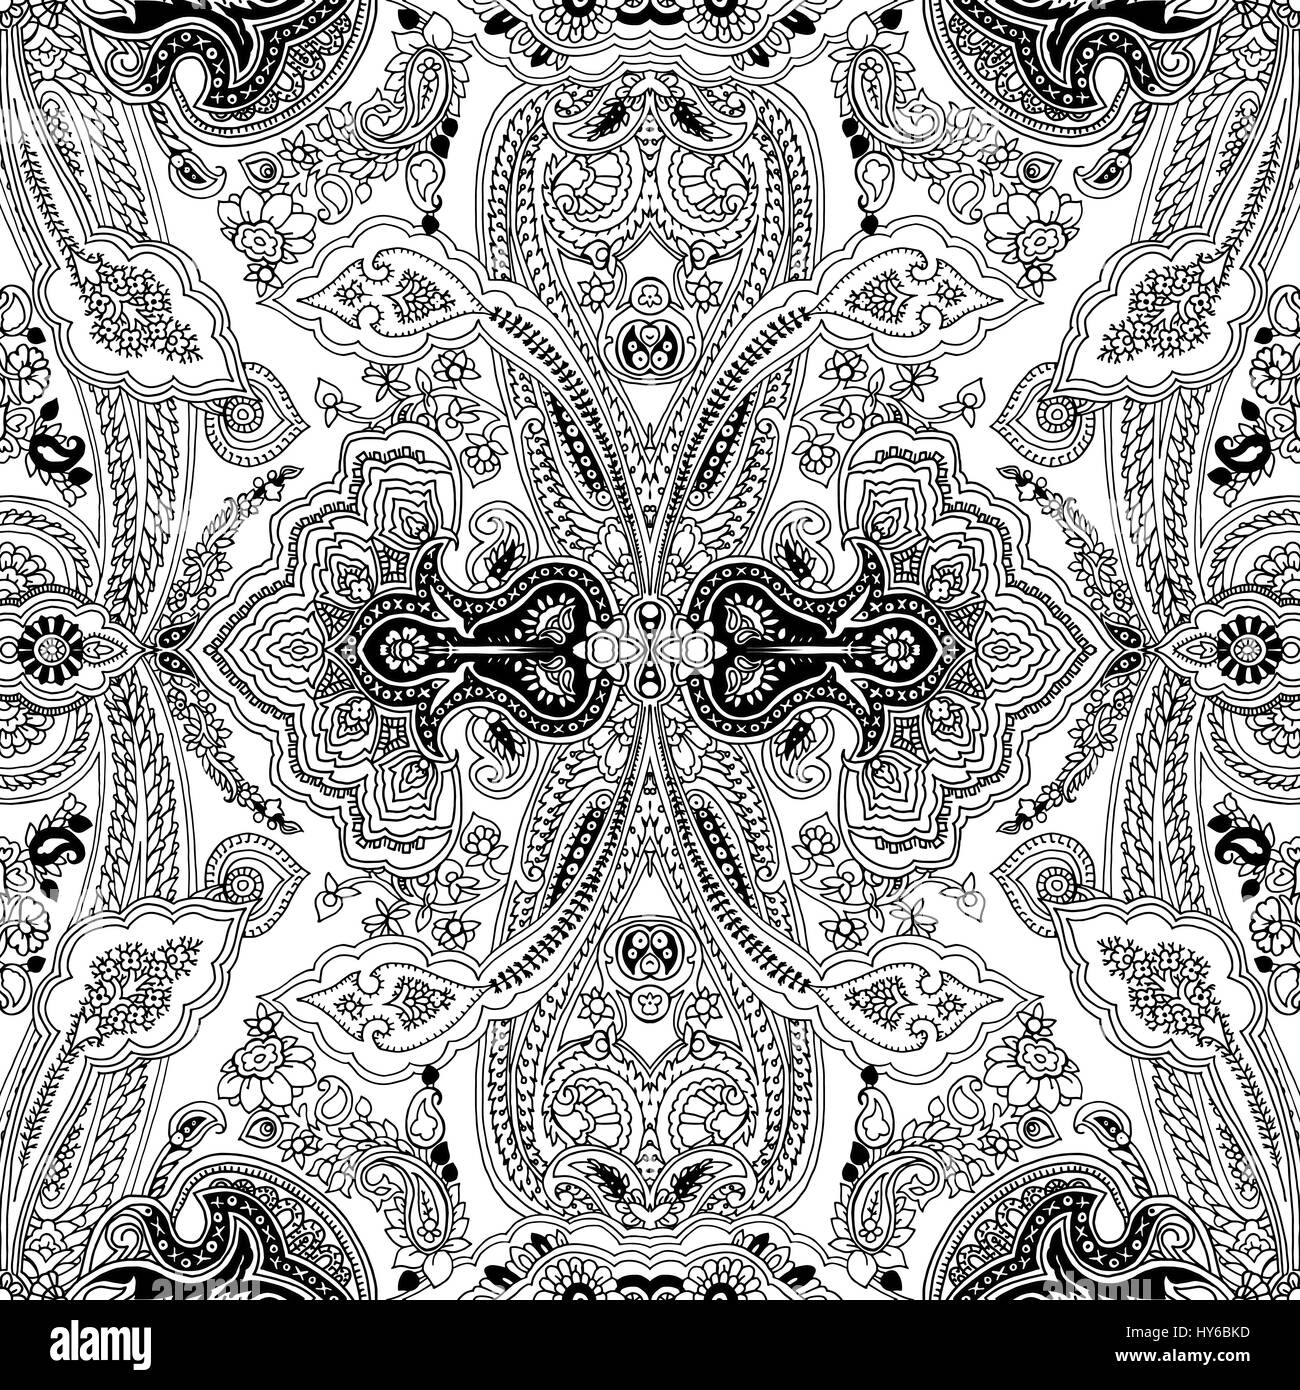 Traditional  paisley pattern. Abstract geometric oriental ornament. Black outlines on white background. Textile design. Stock Vector